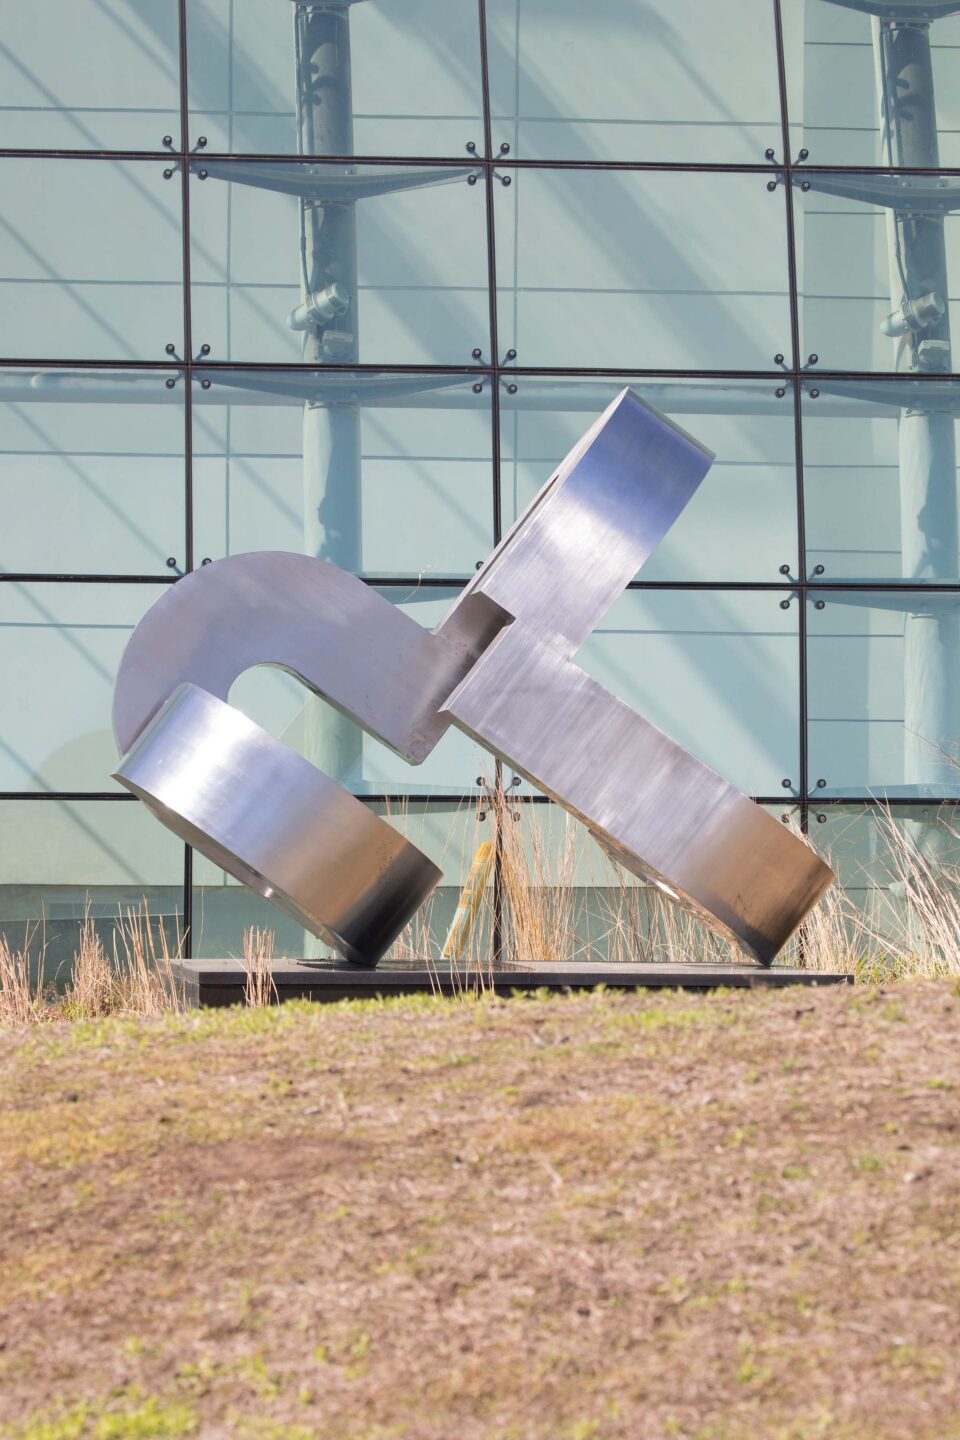 The art piece SENES sits on Pier 79, a steel structure with round edges connected to each other